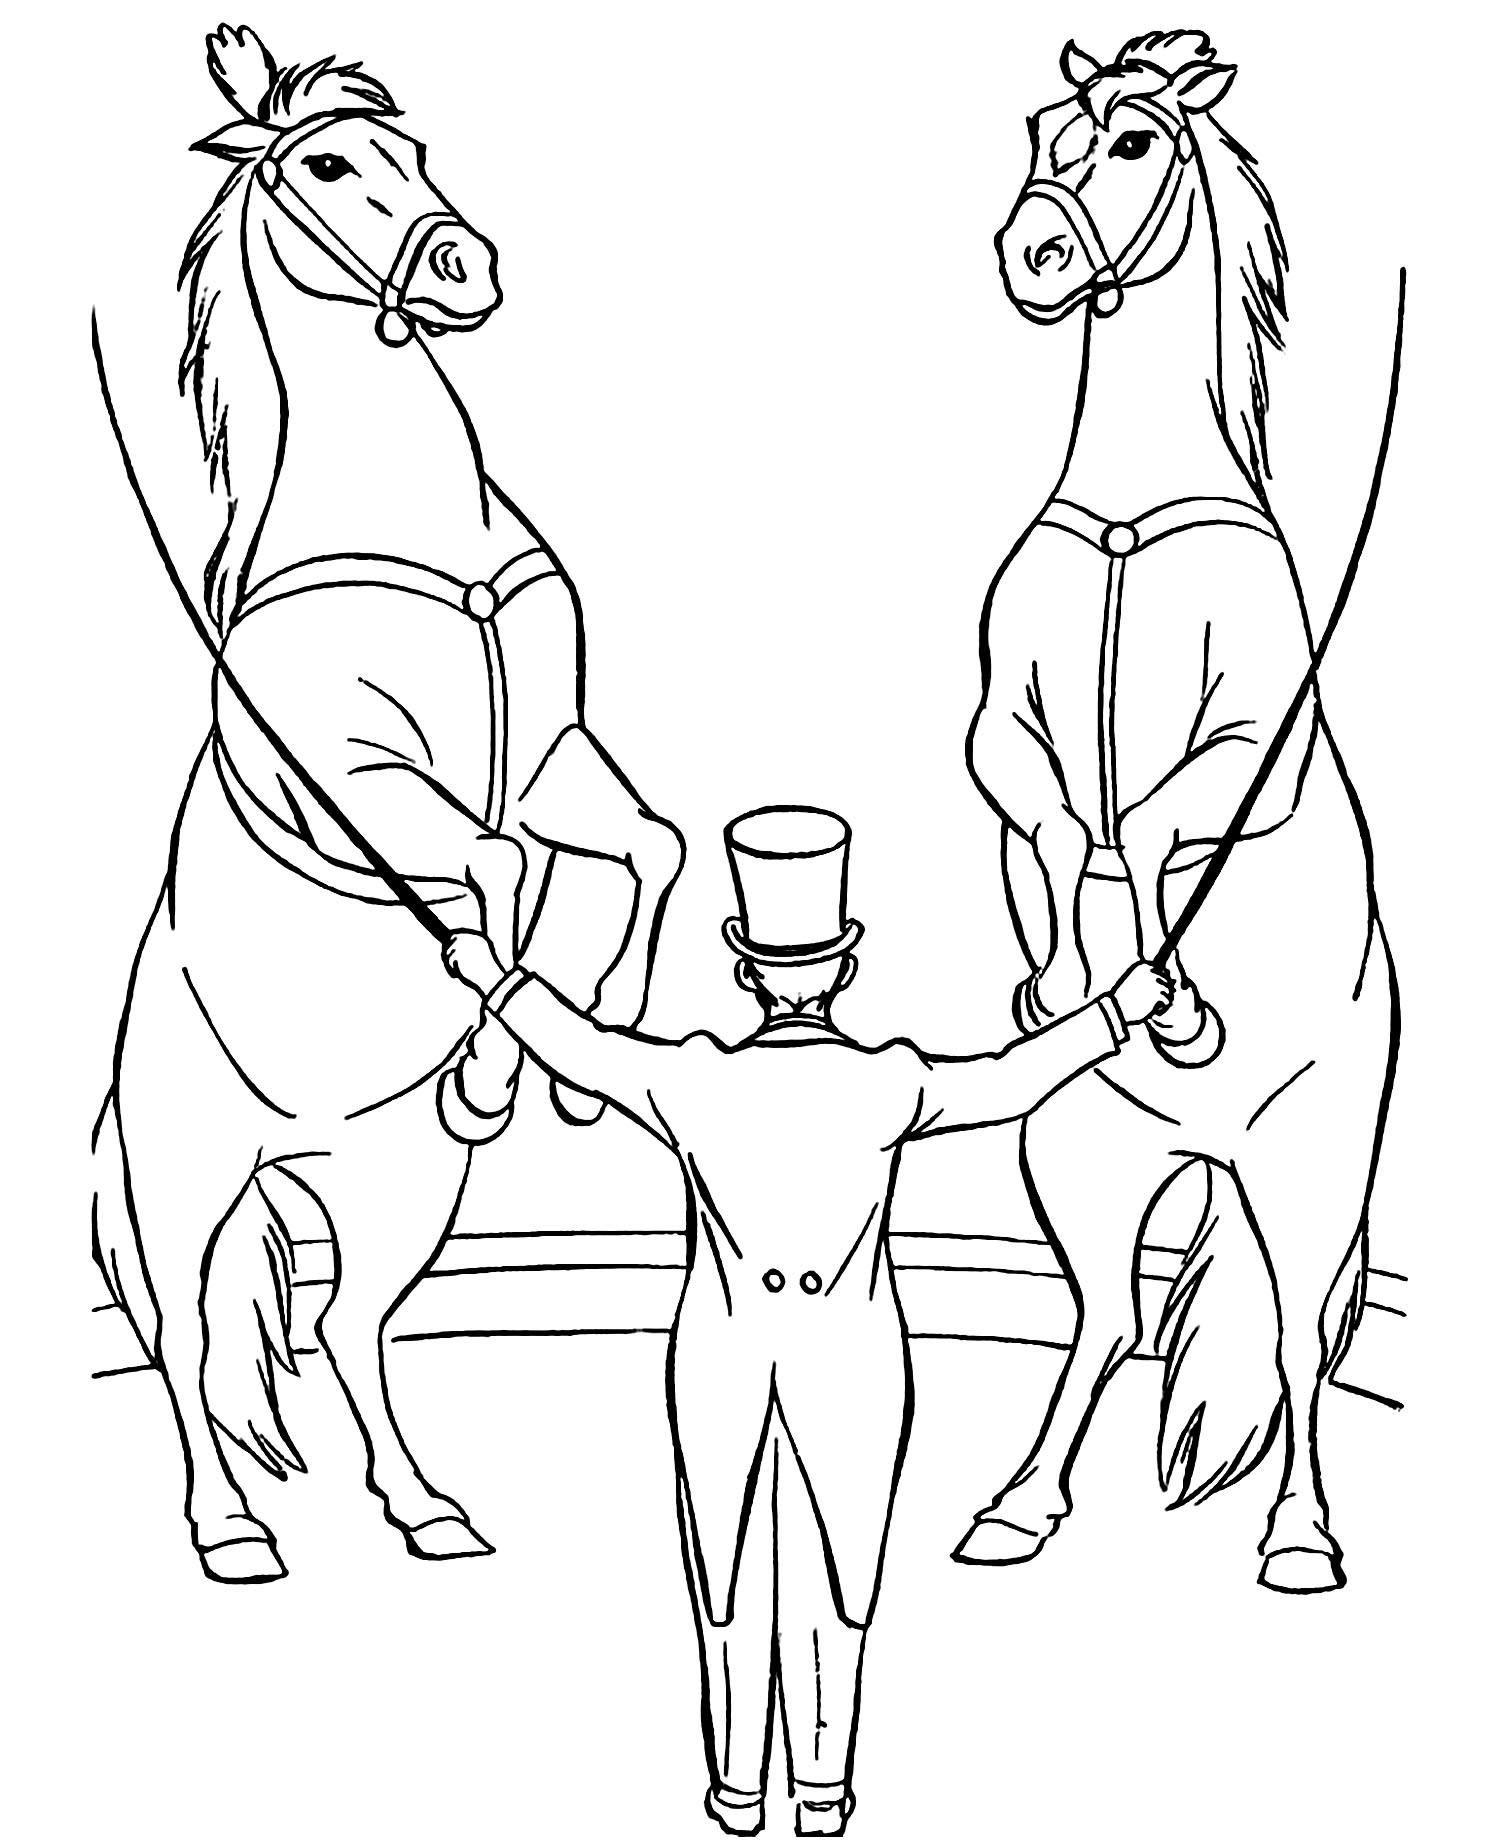 Simple Circus coloring pages for kids